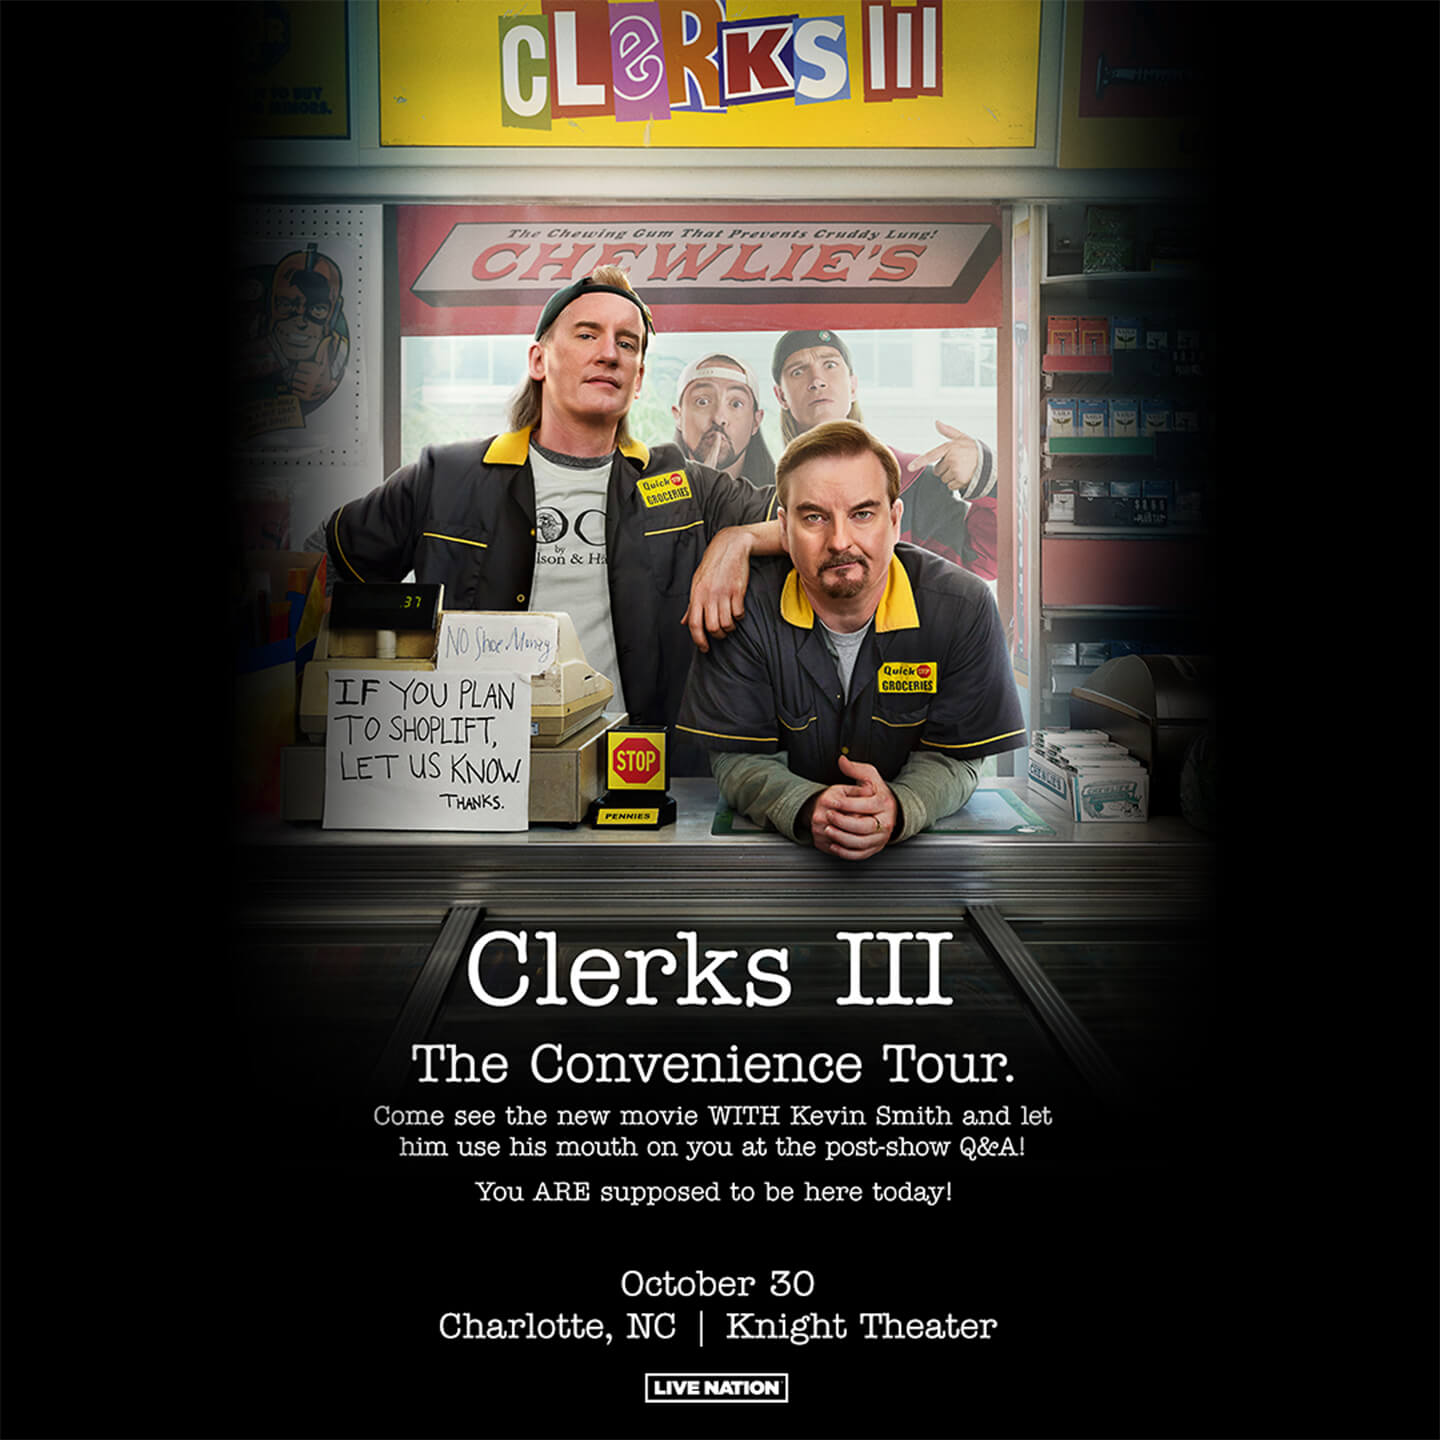 Clerks III: The Convenience Tour with Kevin Smith